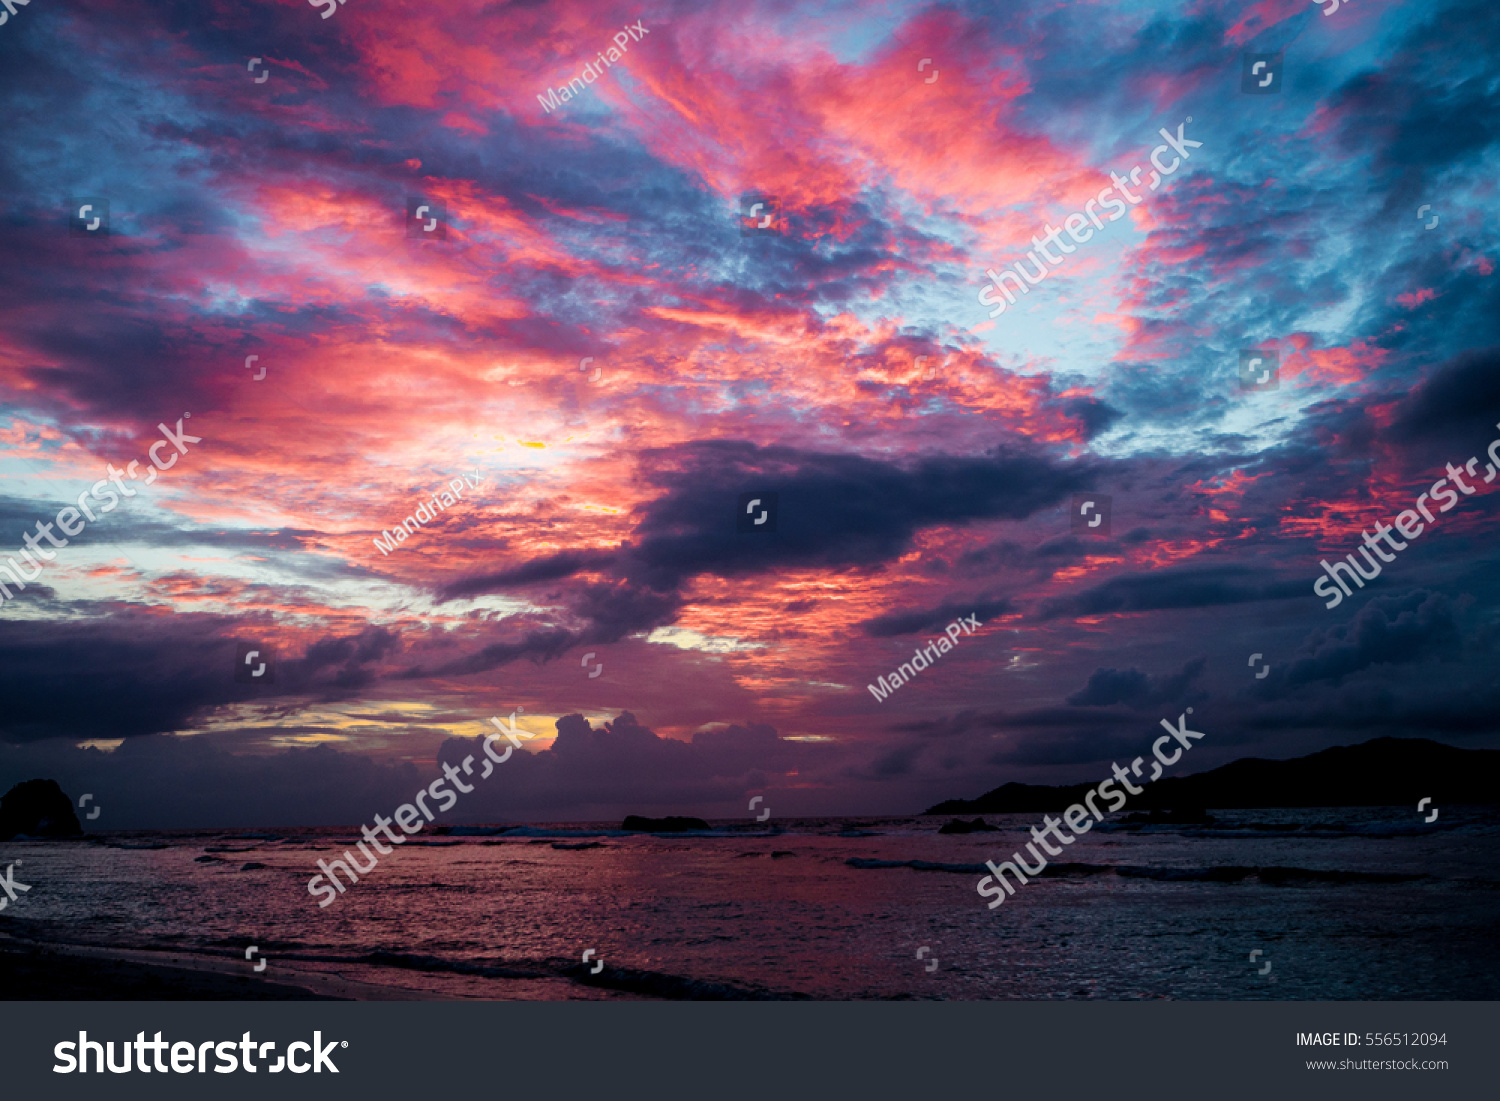 Sunset seascape with dramatic sky and colorful clouds #556512094